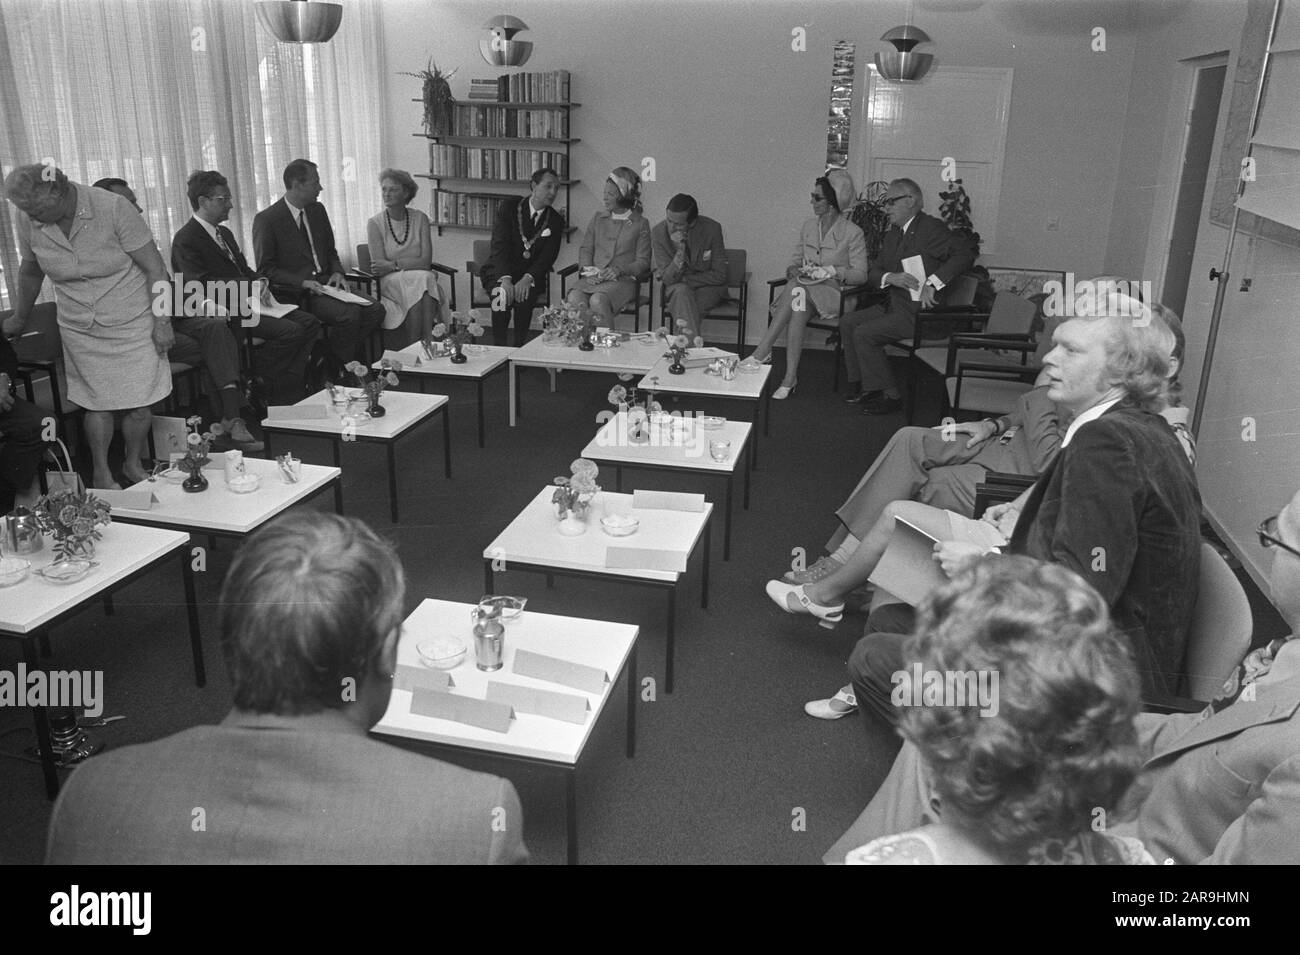 Working visit princess Beatrix and prince Claus to the province of Utrecht, Beatrix and Claus visits retirement home in Lopik, Claus speaks to the elderly/Date: 23 August 1972 Location: Lopik, Utrecht Keywords: Elderly, retirement homes, visits Personal name: Beatrix, princess, Claus, prince Stock Photo